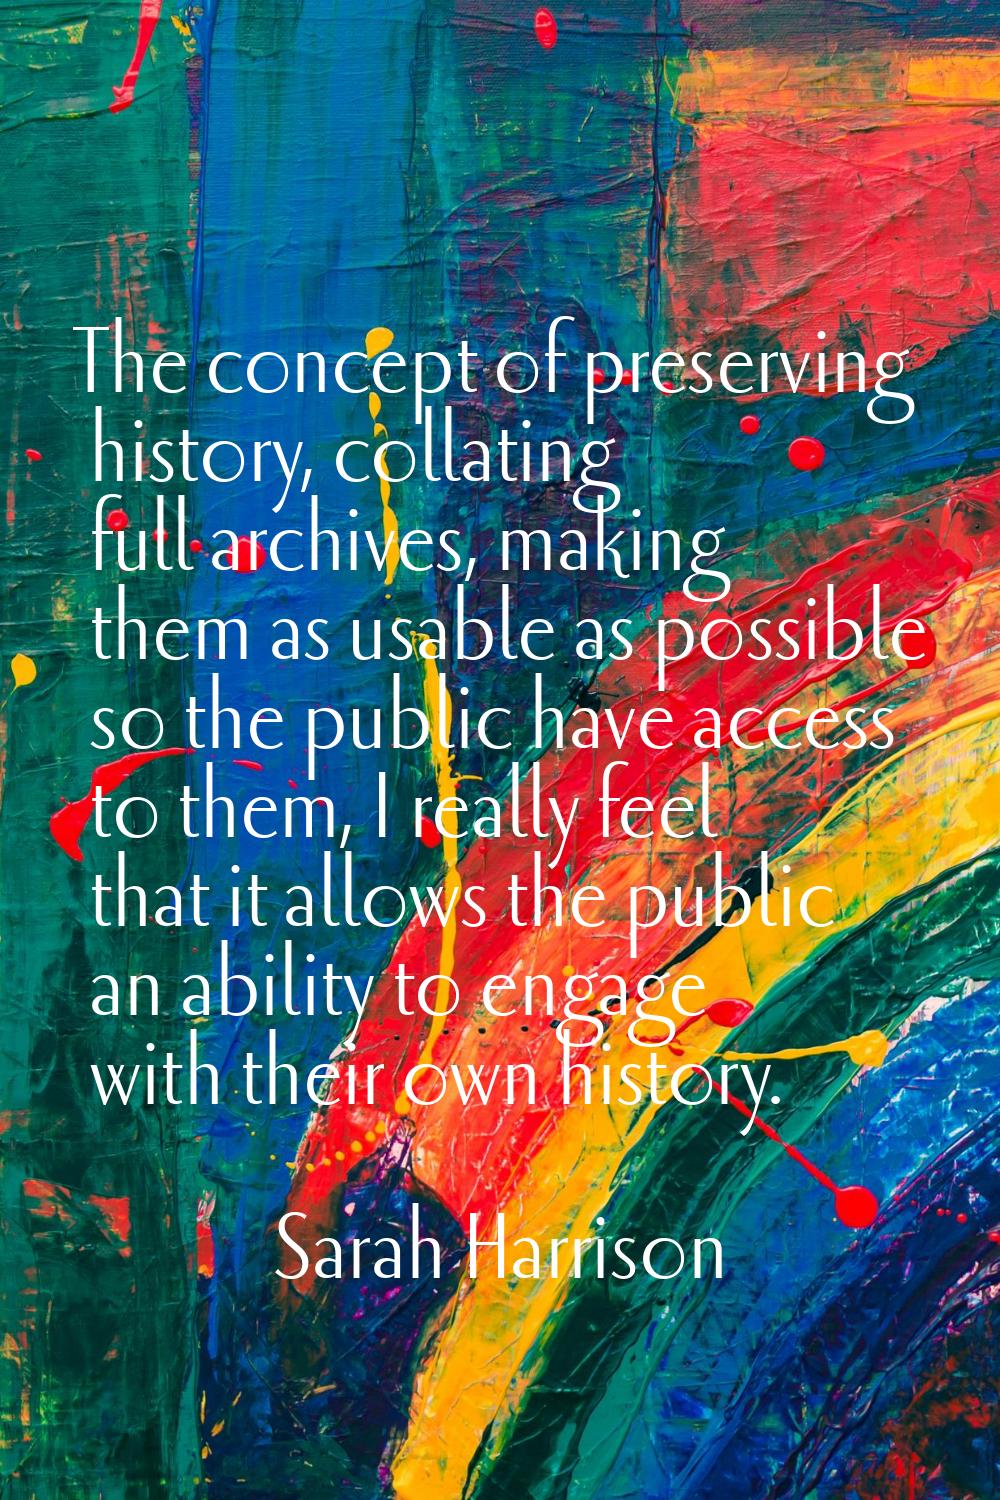 The concept of preserving history, collating full archives, making them as usable as possible so th